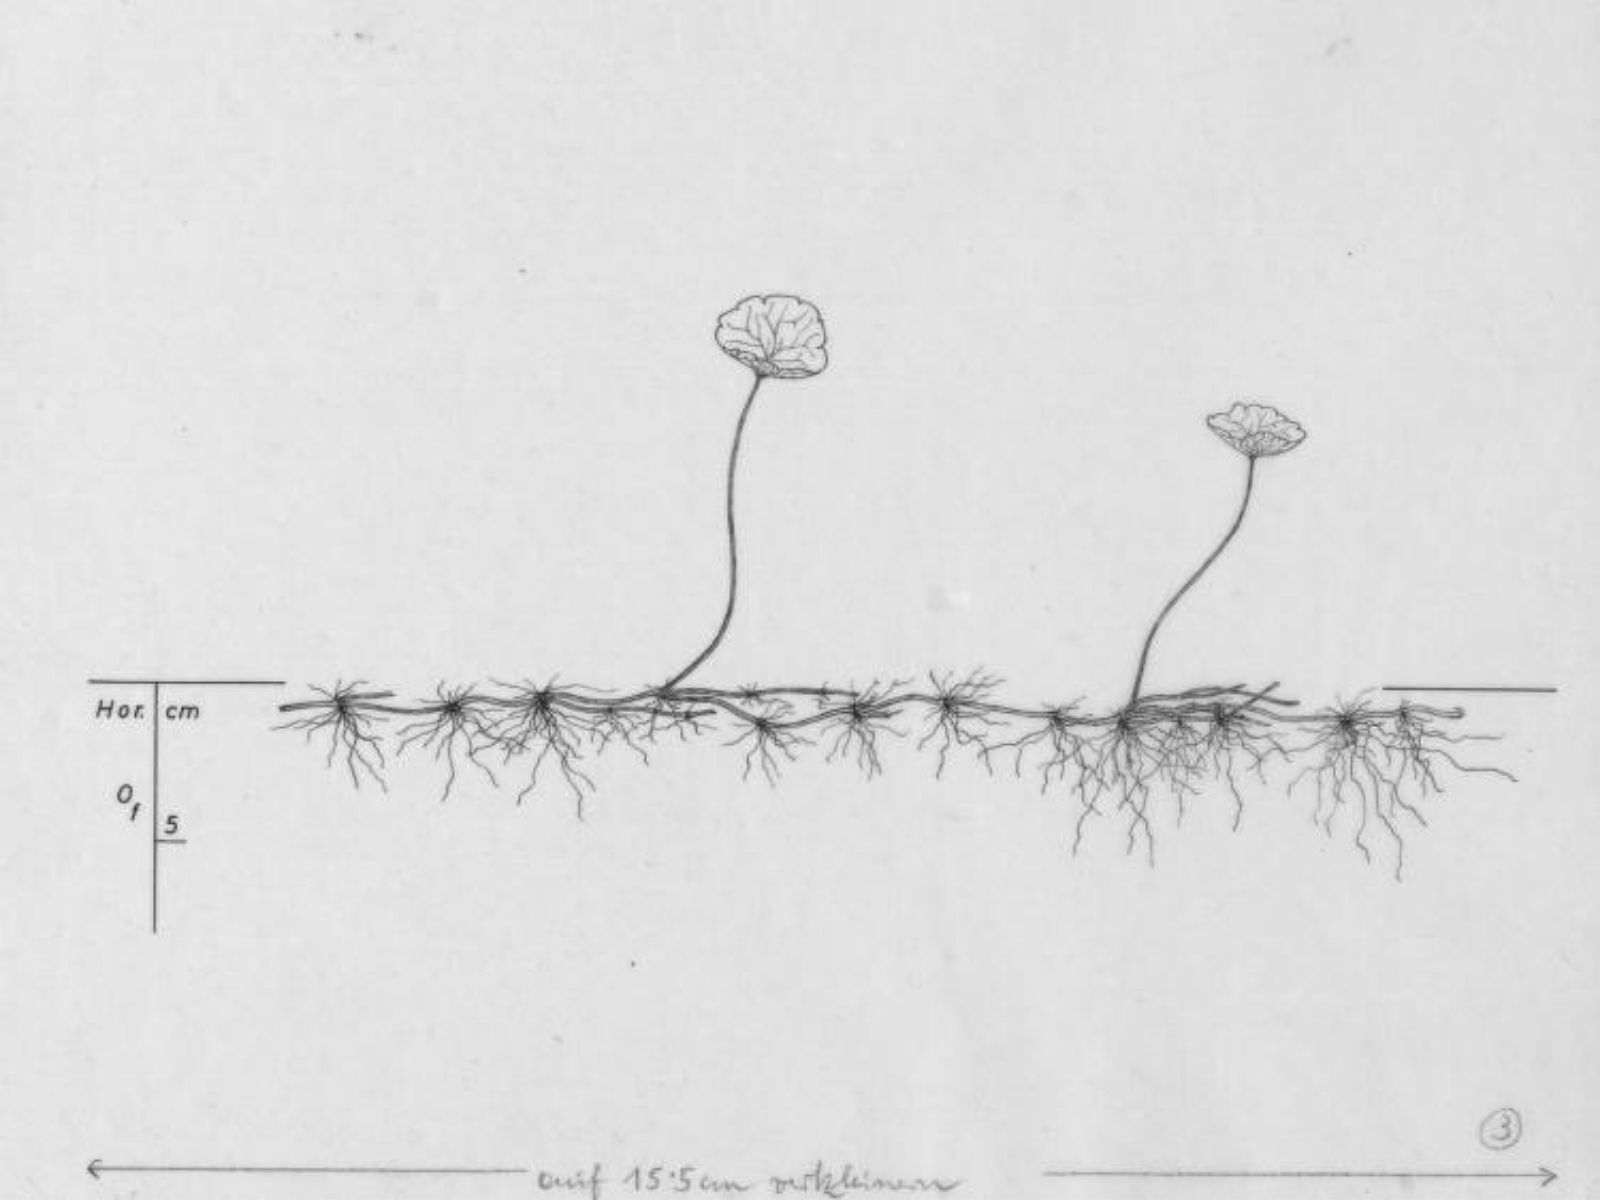 Series of drawings of complex root systems by professional botanists on Thursd